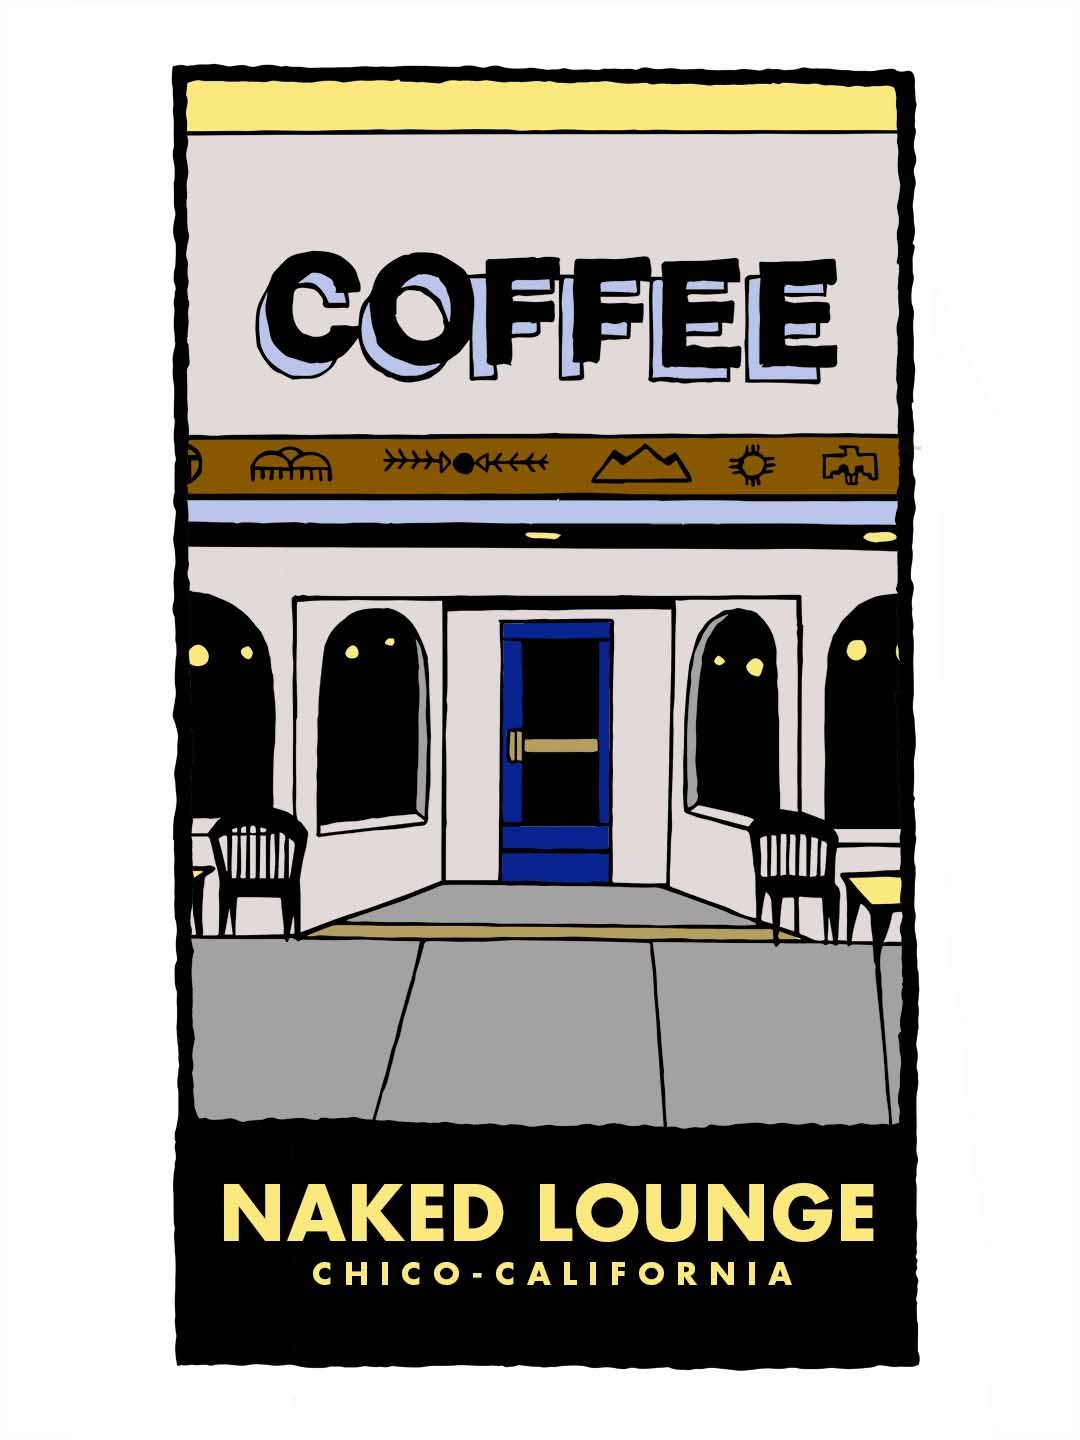 Image of Naked Lounge Chico Legends print